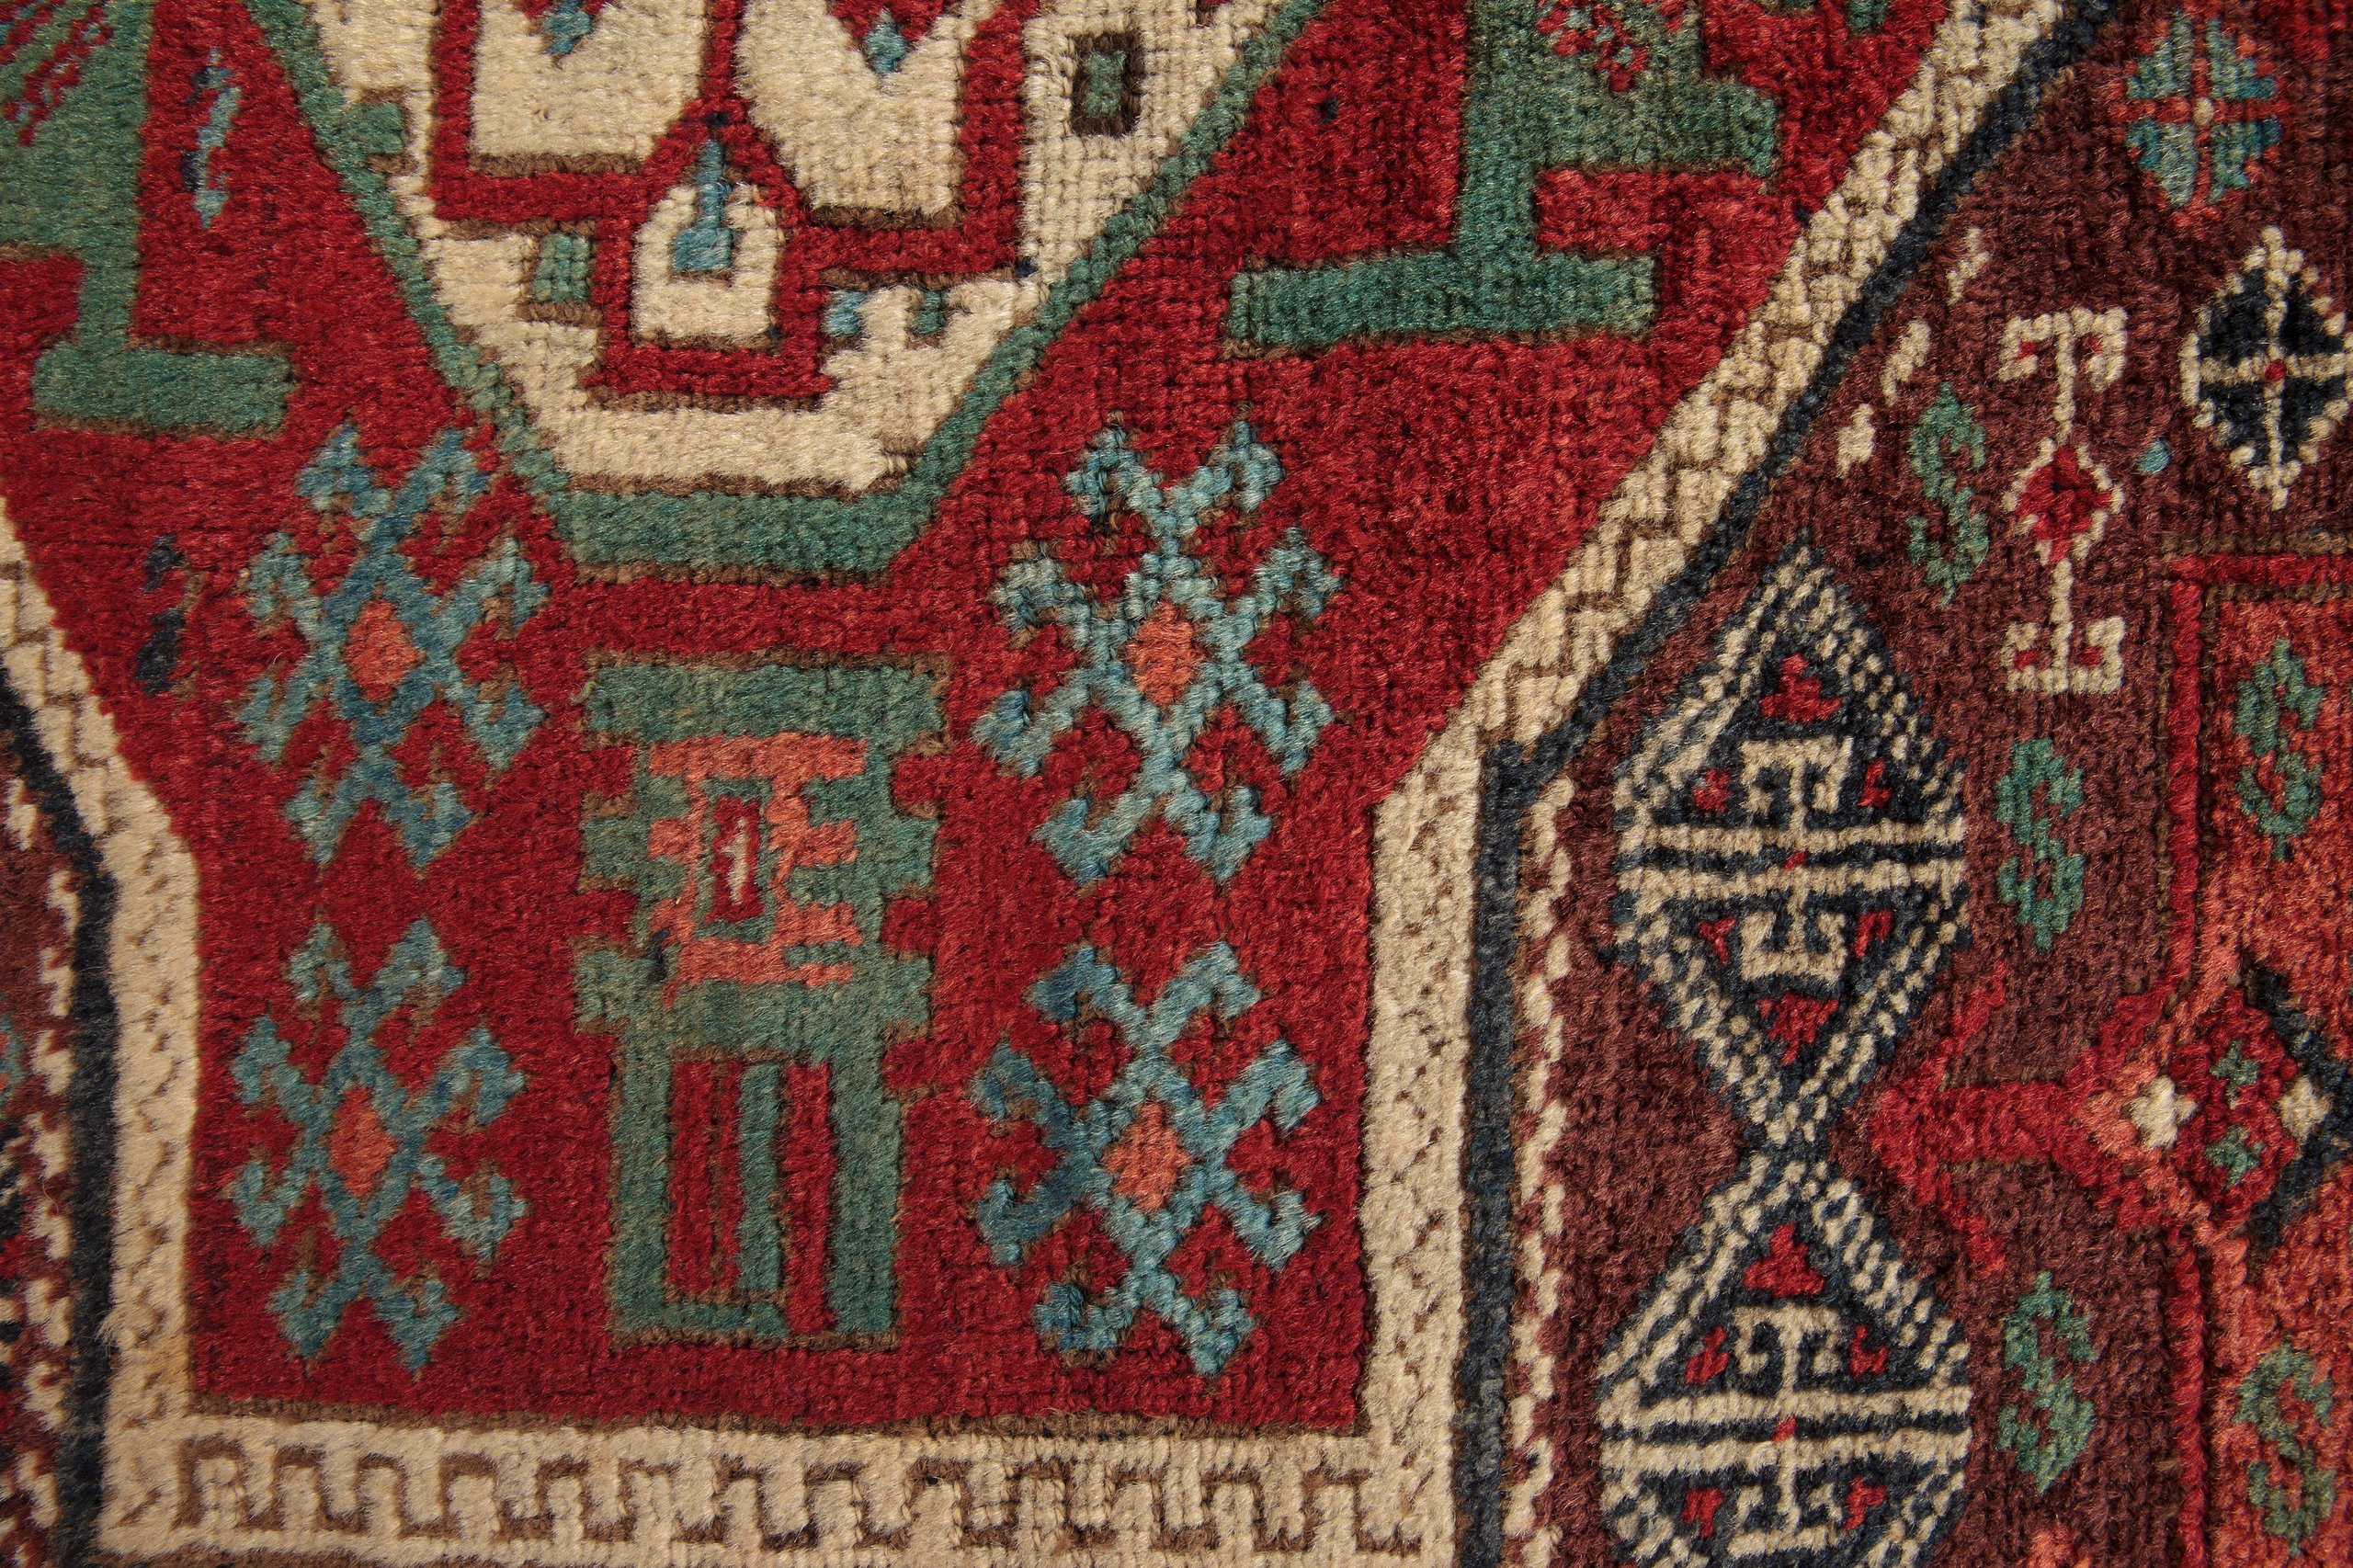 Knotted pile rug from eastern Anatolia